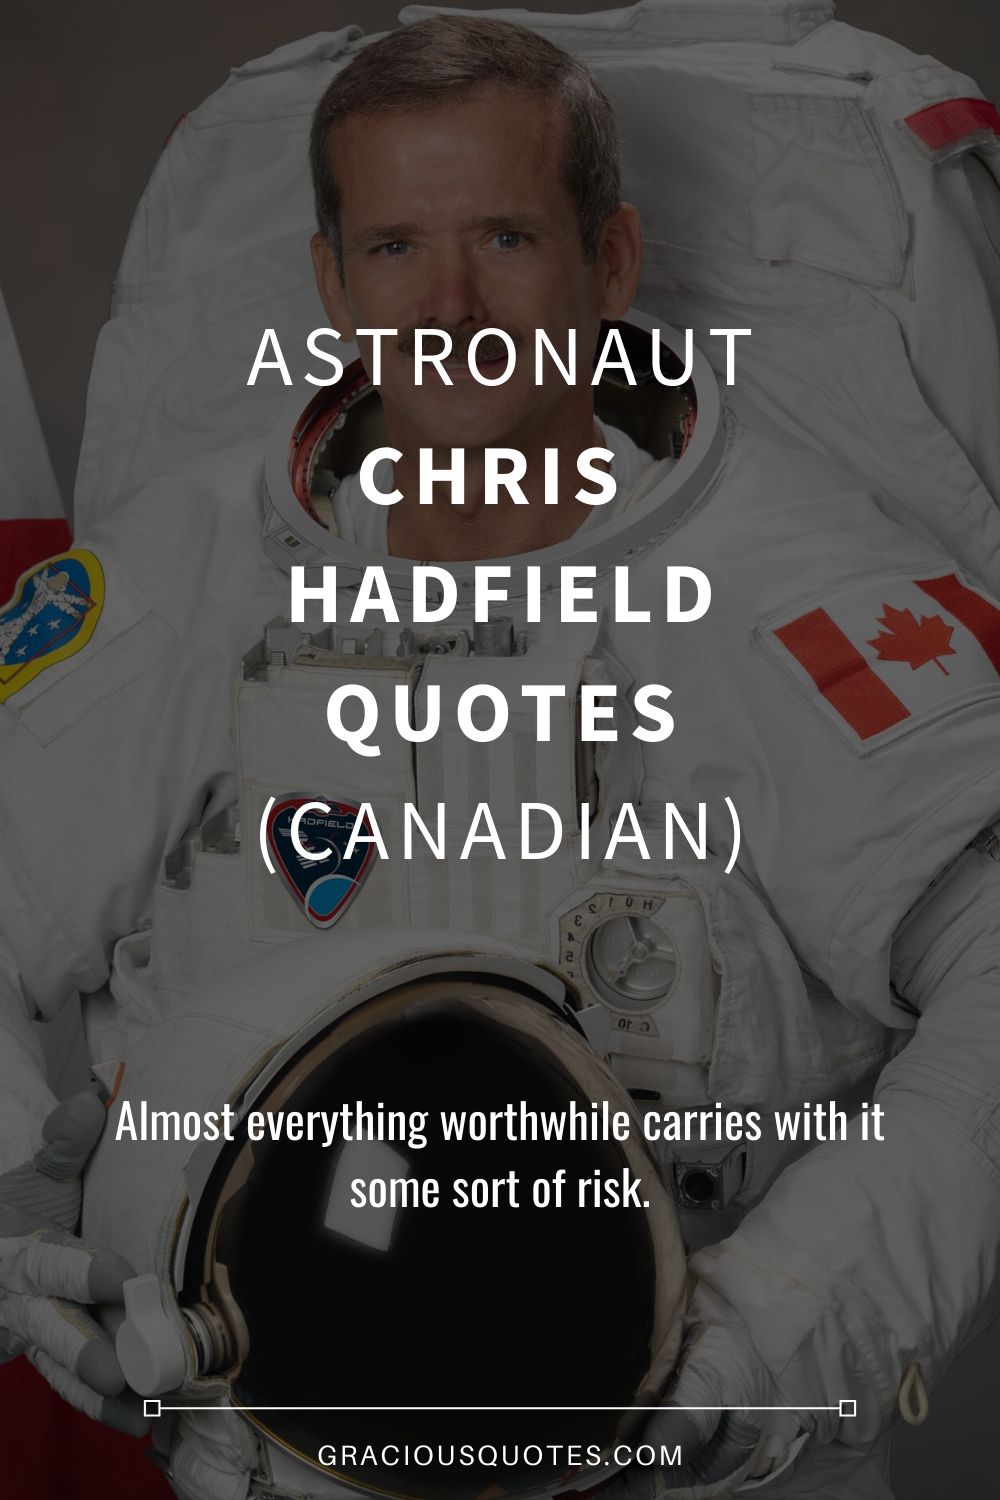 Astronaut Chris Hadfield Quotes (CANADIAN) - Gracious Quotes